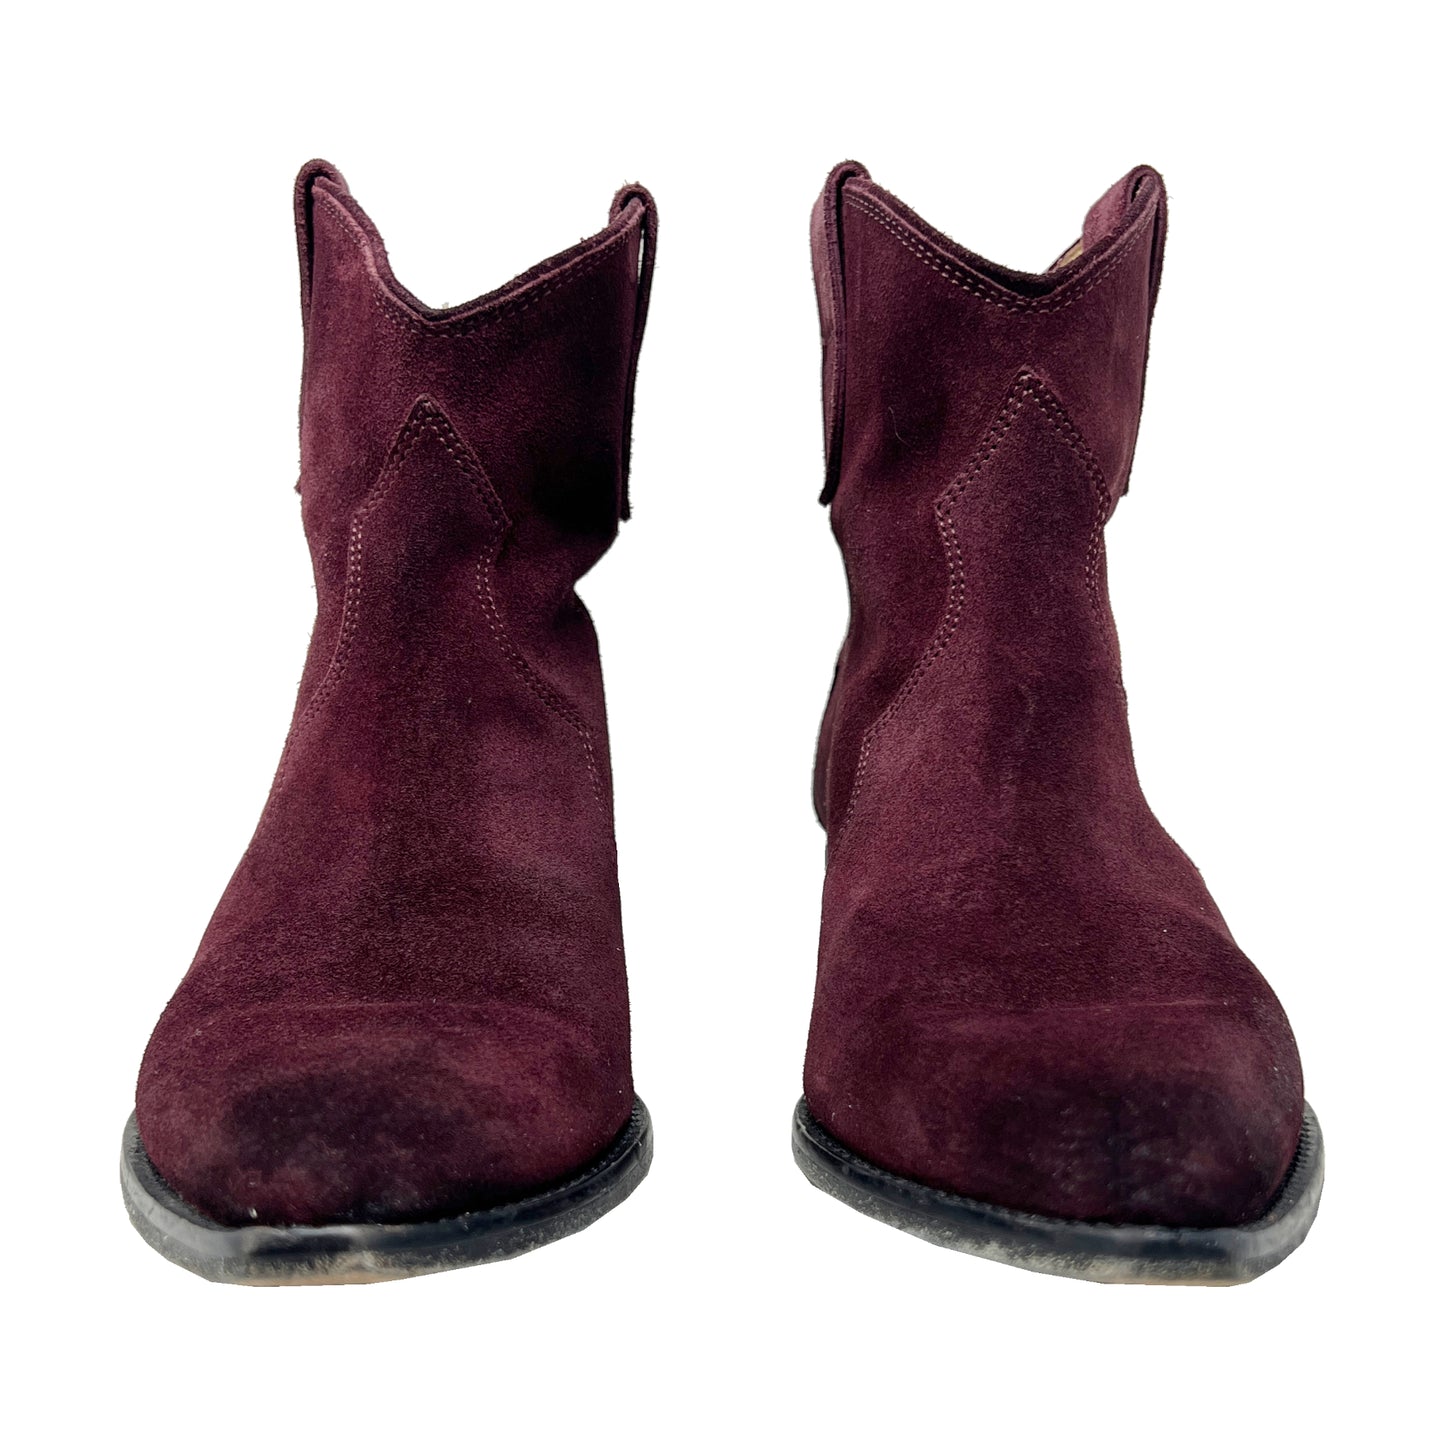 Isabel Marant Boots Dewina Dark Red Suede Ankle Boots Size EU 37